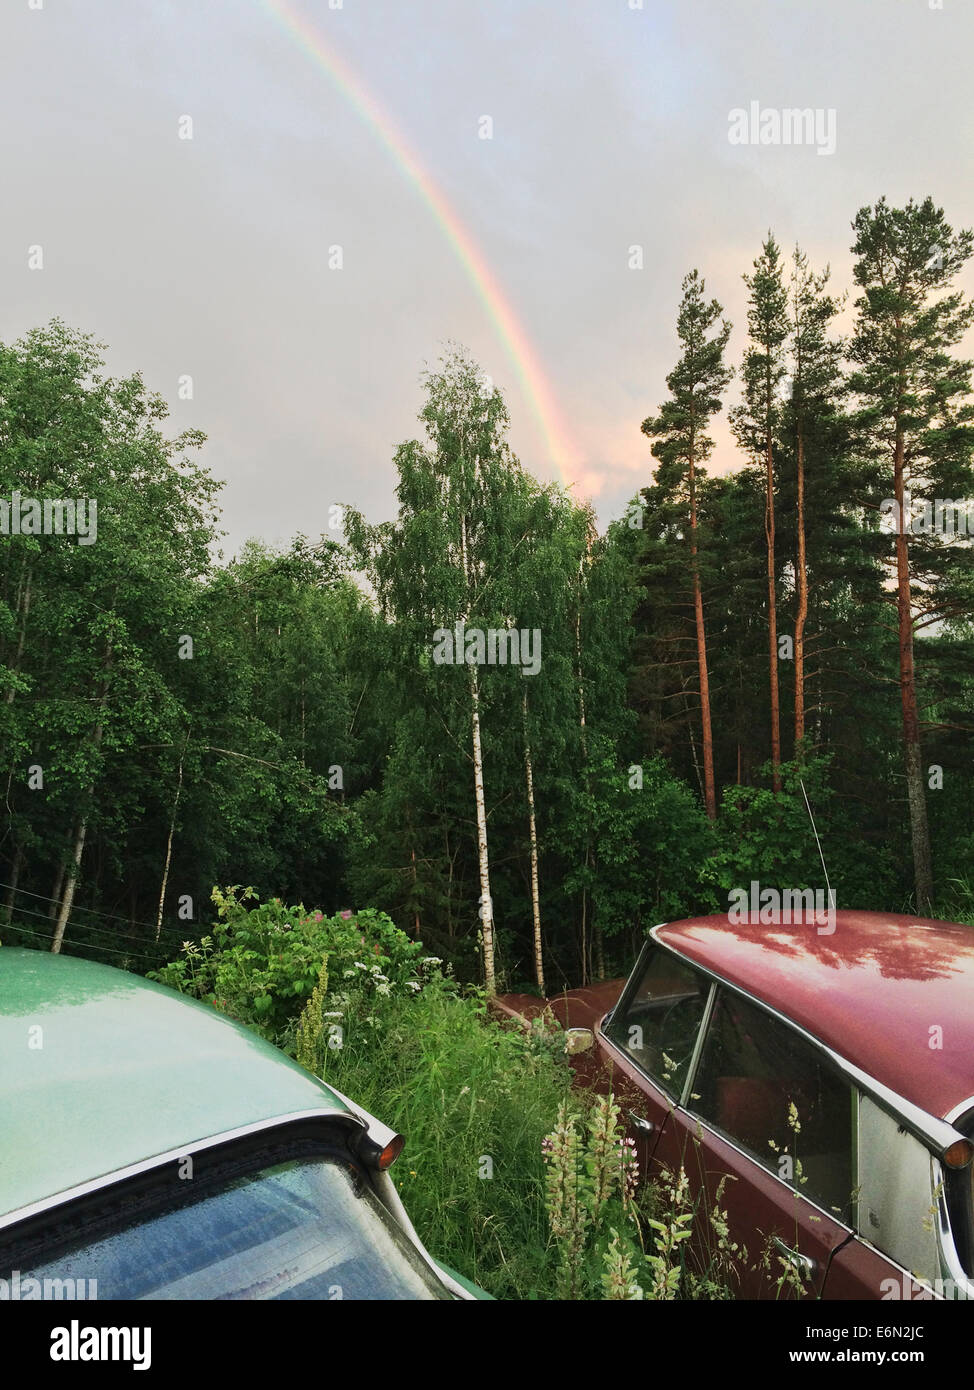 Two Citroen DS cars, green and red, rust in a Norwegian forest with a rainbow in the background. Stock Photo